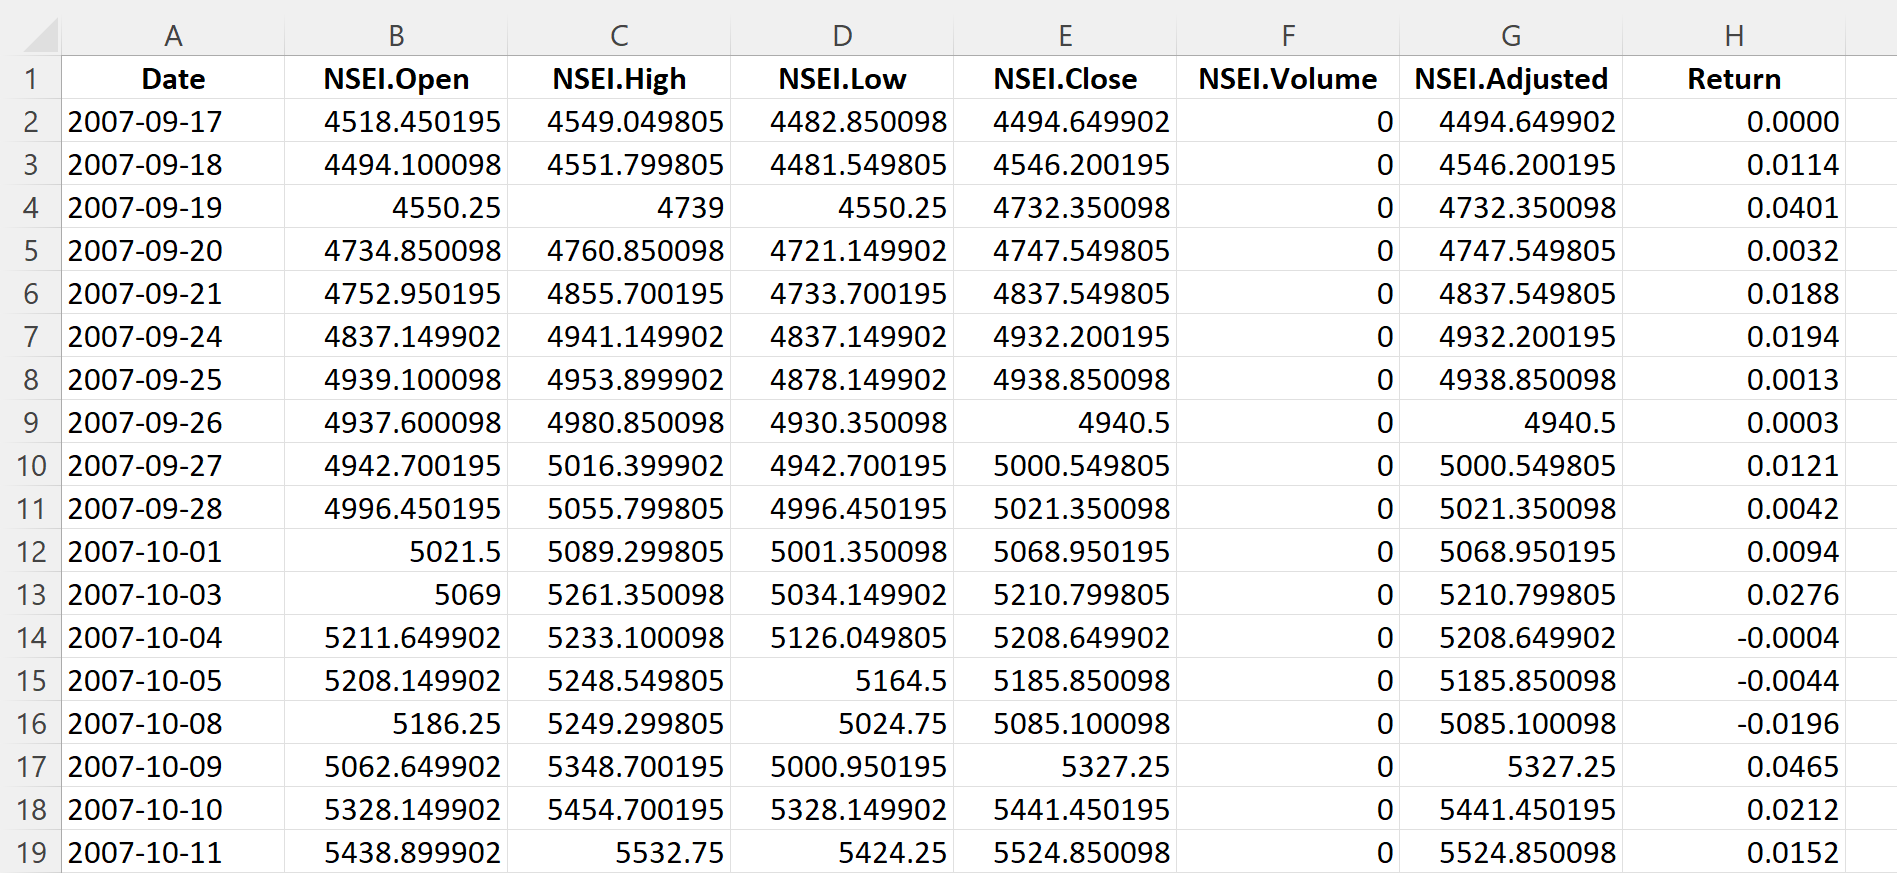 Top of the file for the Nifty 50 index data